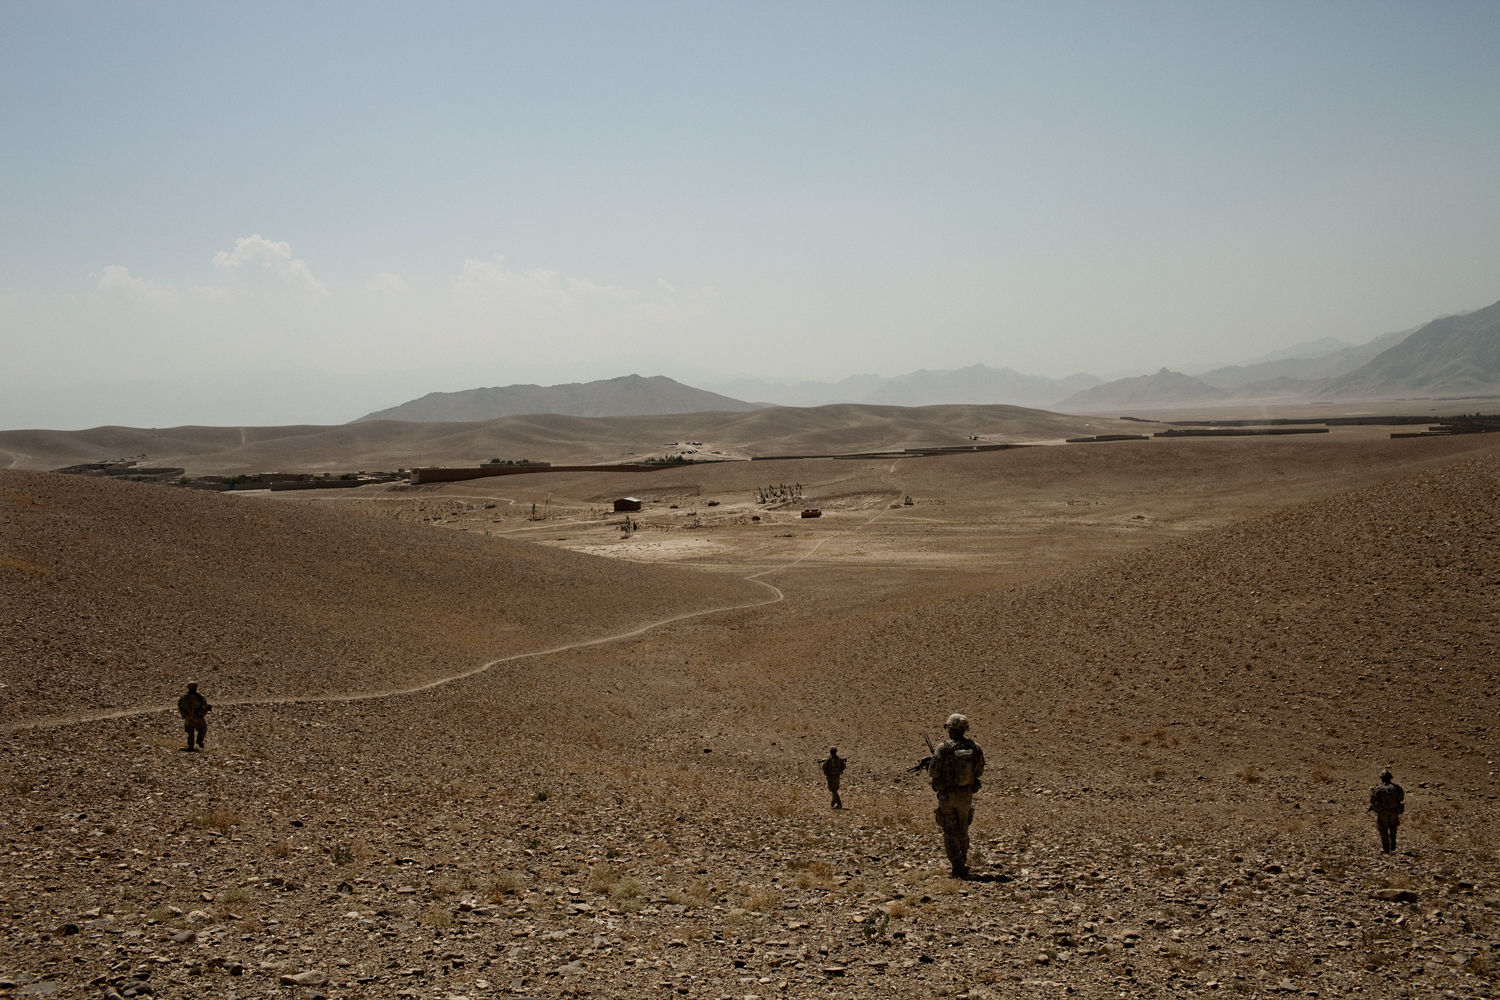  U.S. Army soldiers patrol in the Tangi Valley during an operation in Wardak Province, Afghanistan.    